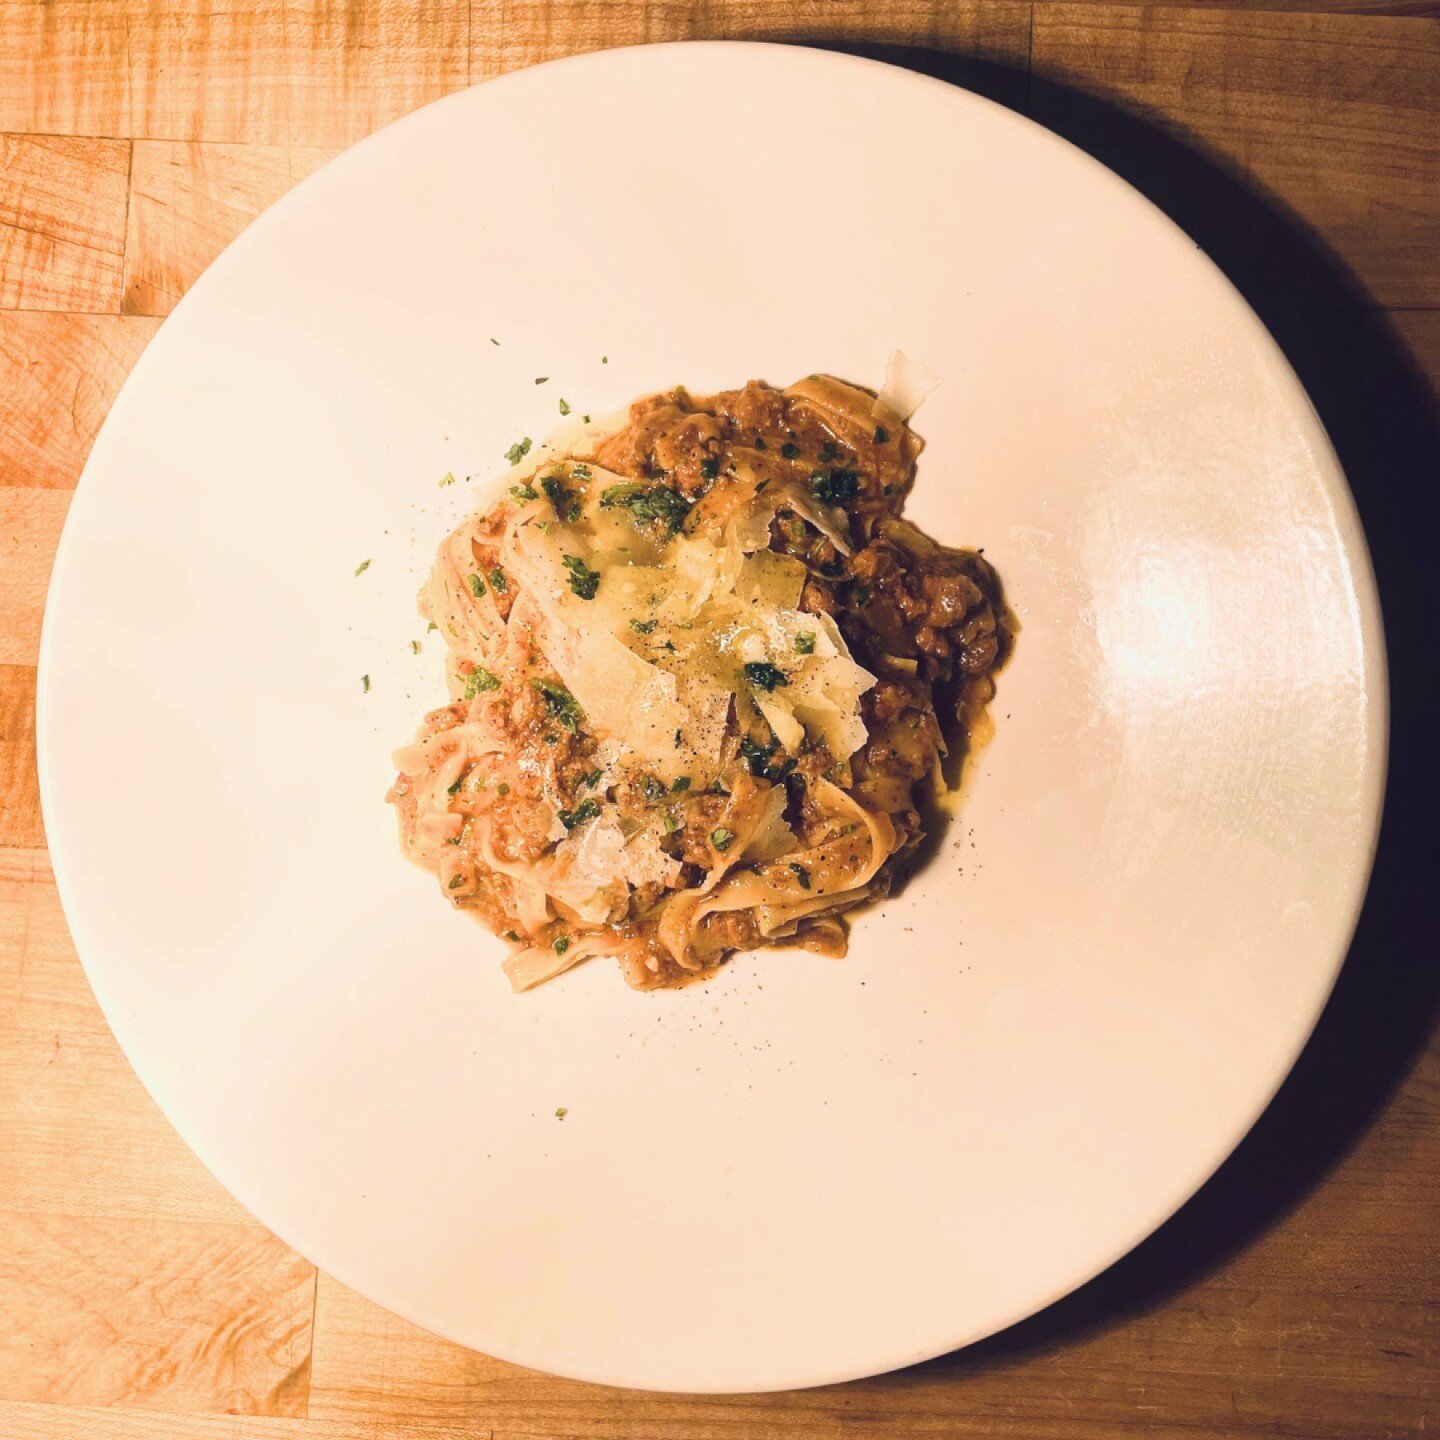 Another exciting new menu addition; The Tagliatelle Alla Bolognese. Housemade Tagliatelle pasta, tossed in a traditional meat rags and finished off with parmigiana reggiano. This side screams winter warmer. Check out this dish and all of our new menu